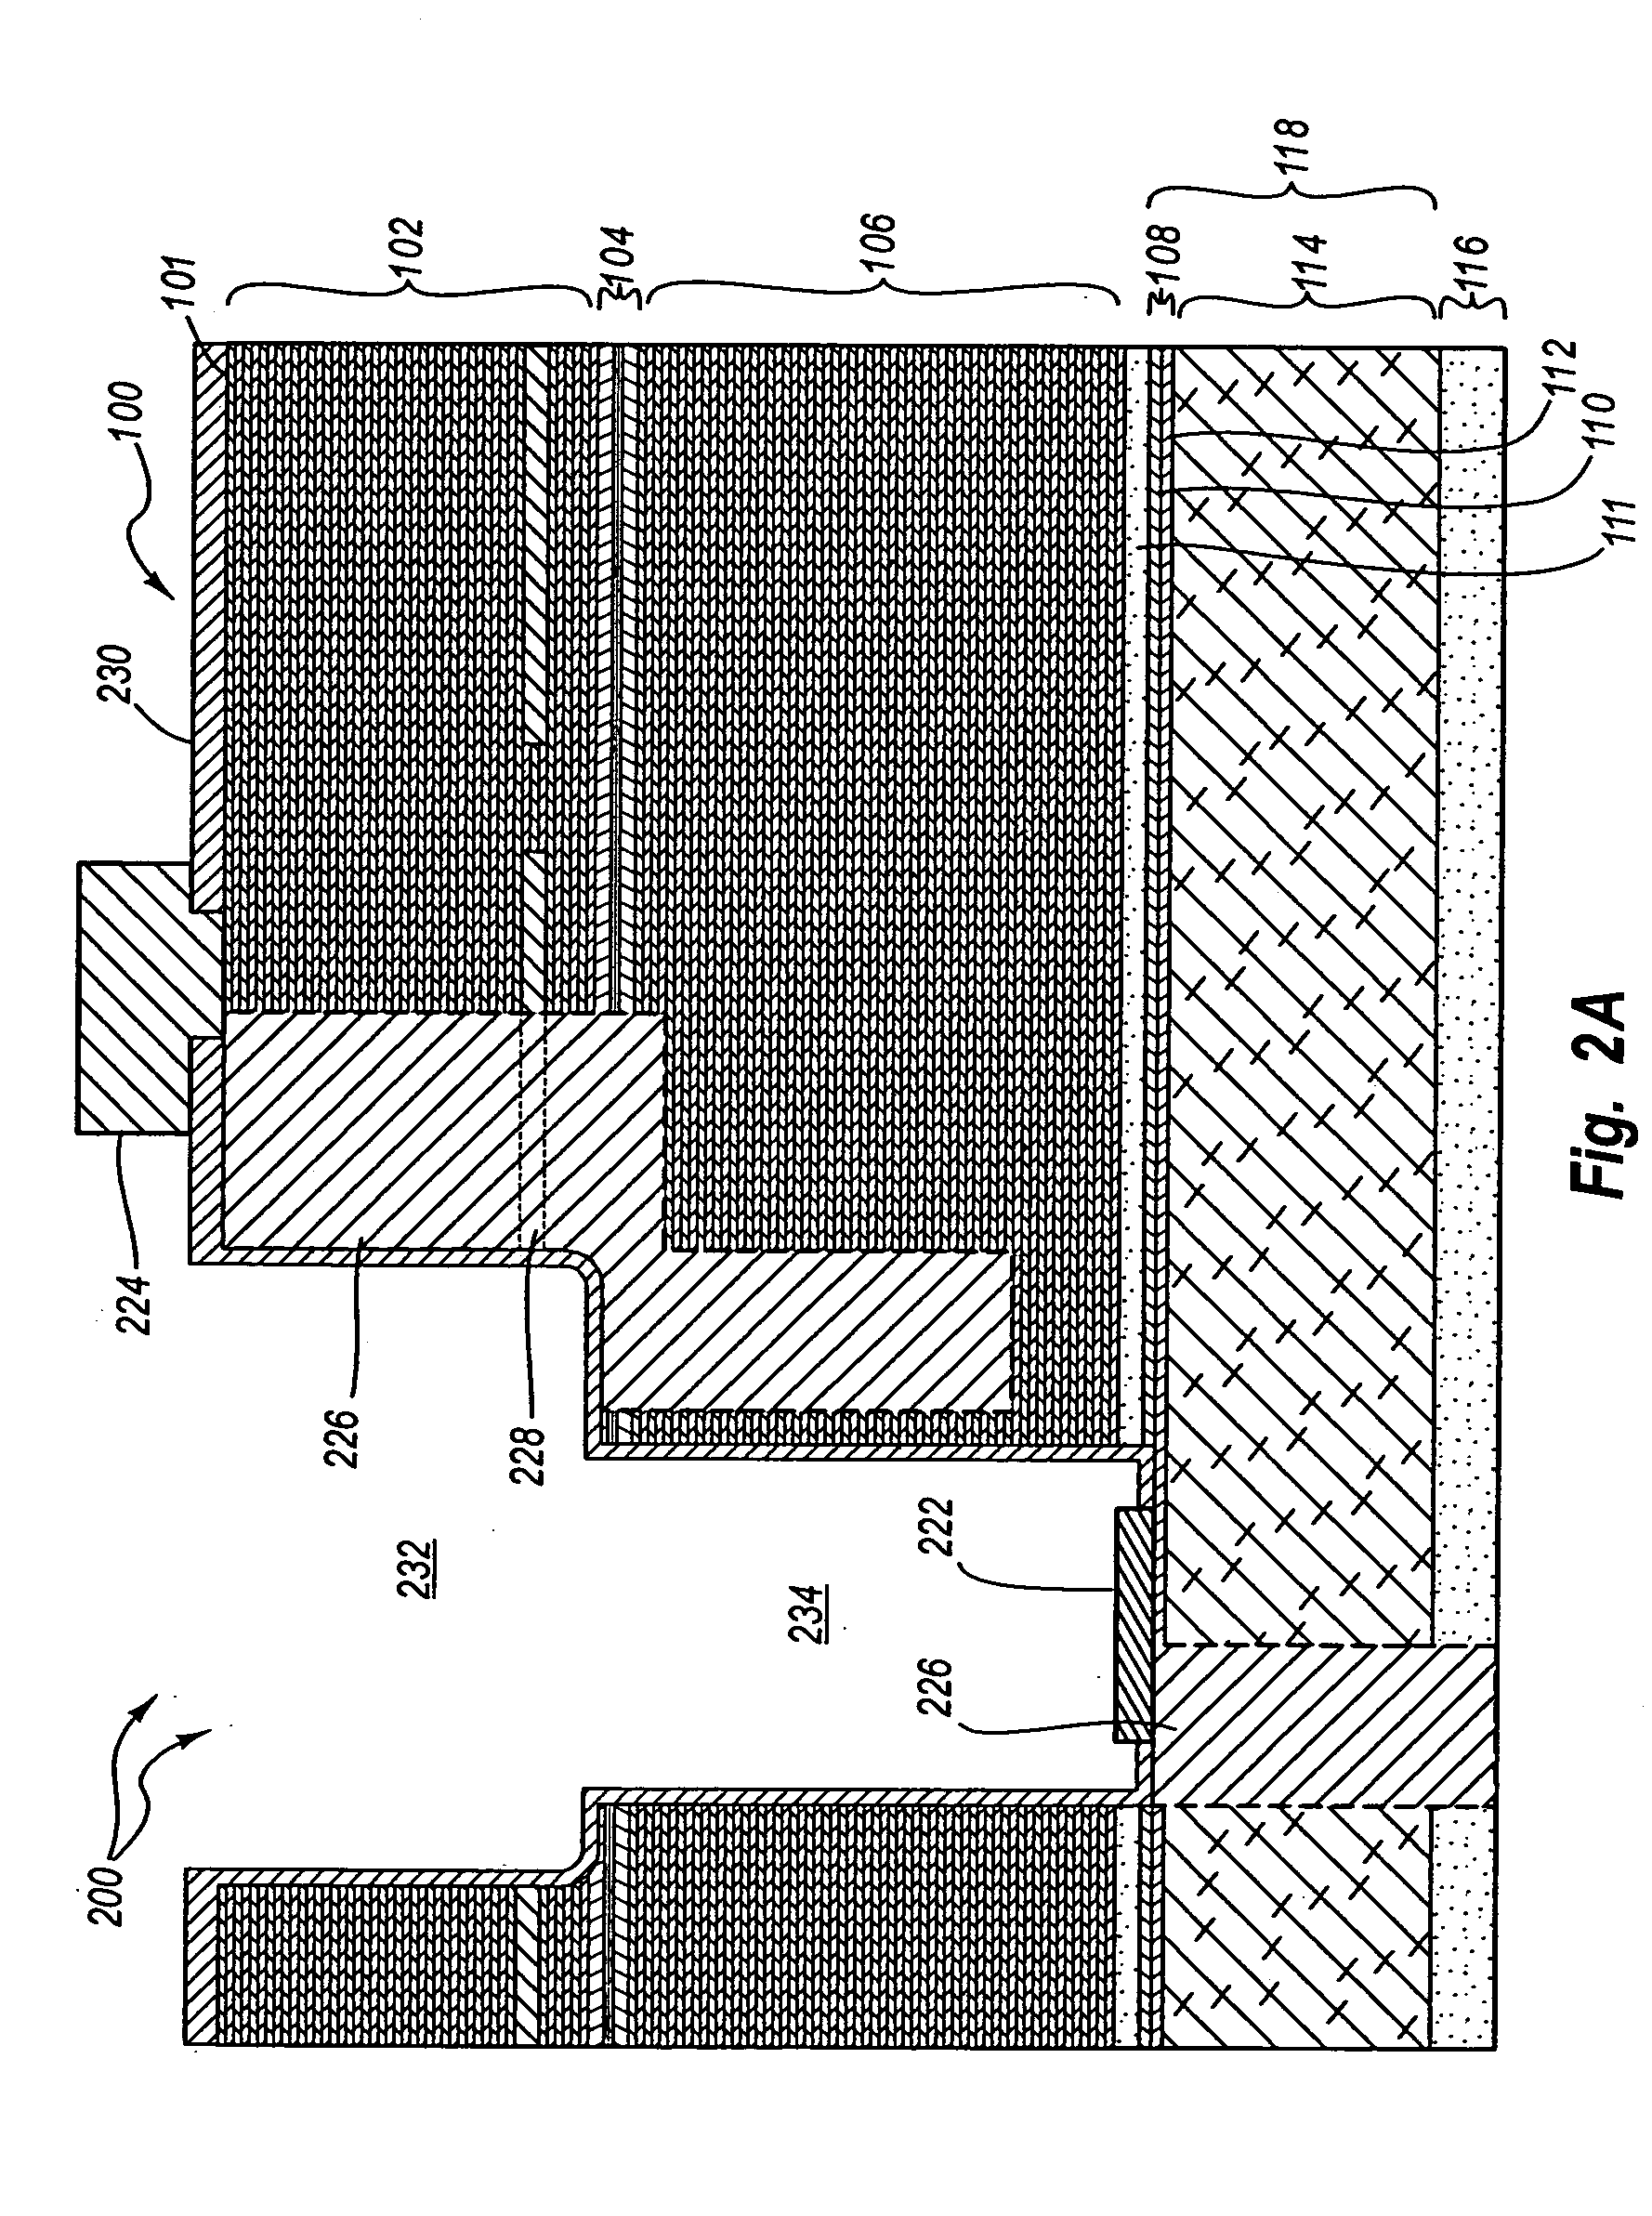 Light emitting device with an integrated monitor photodiode